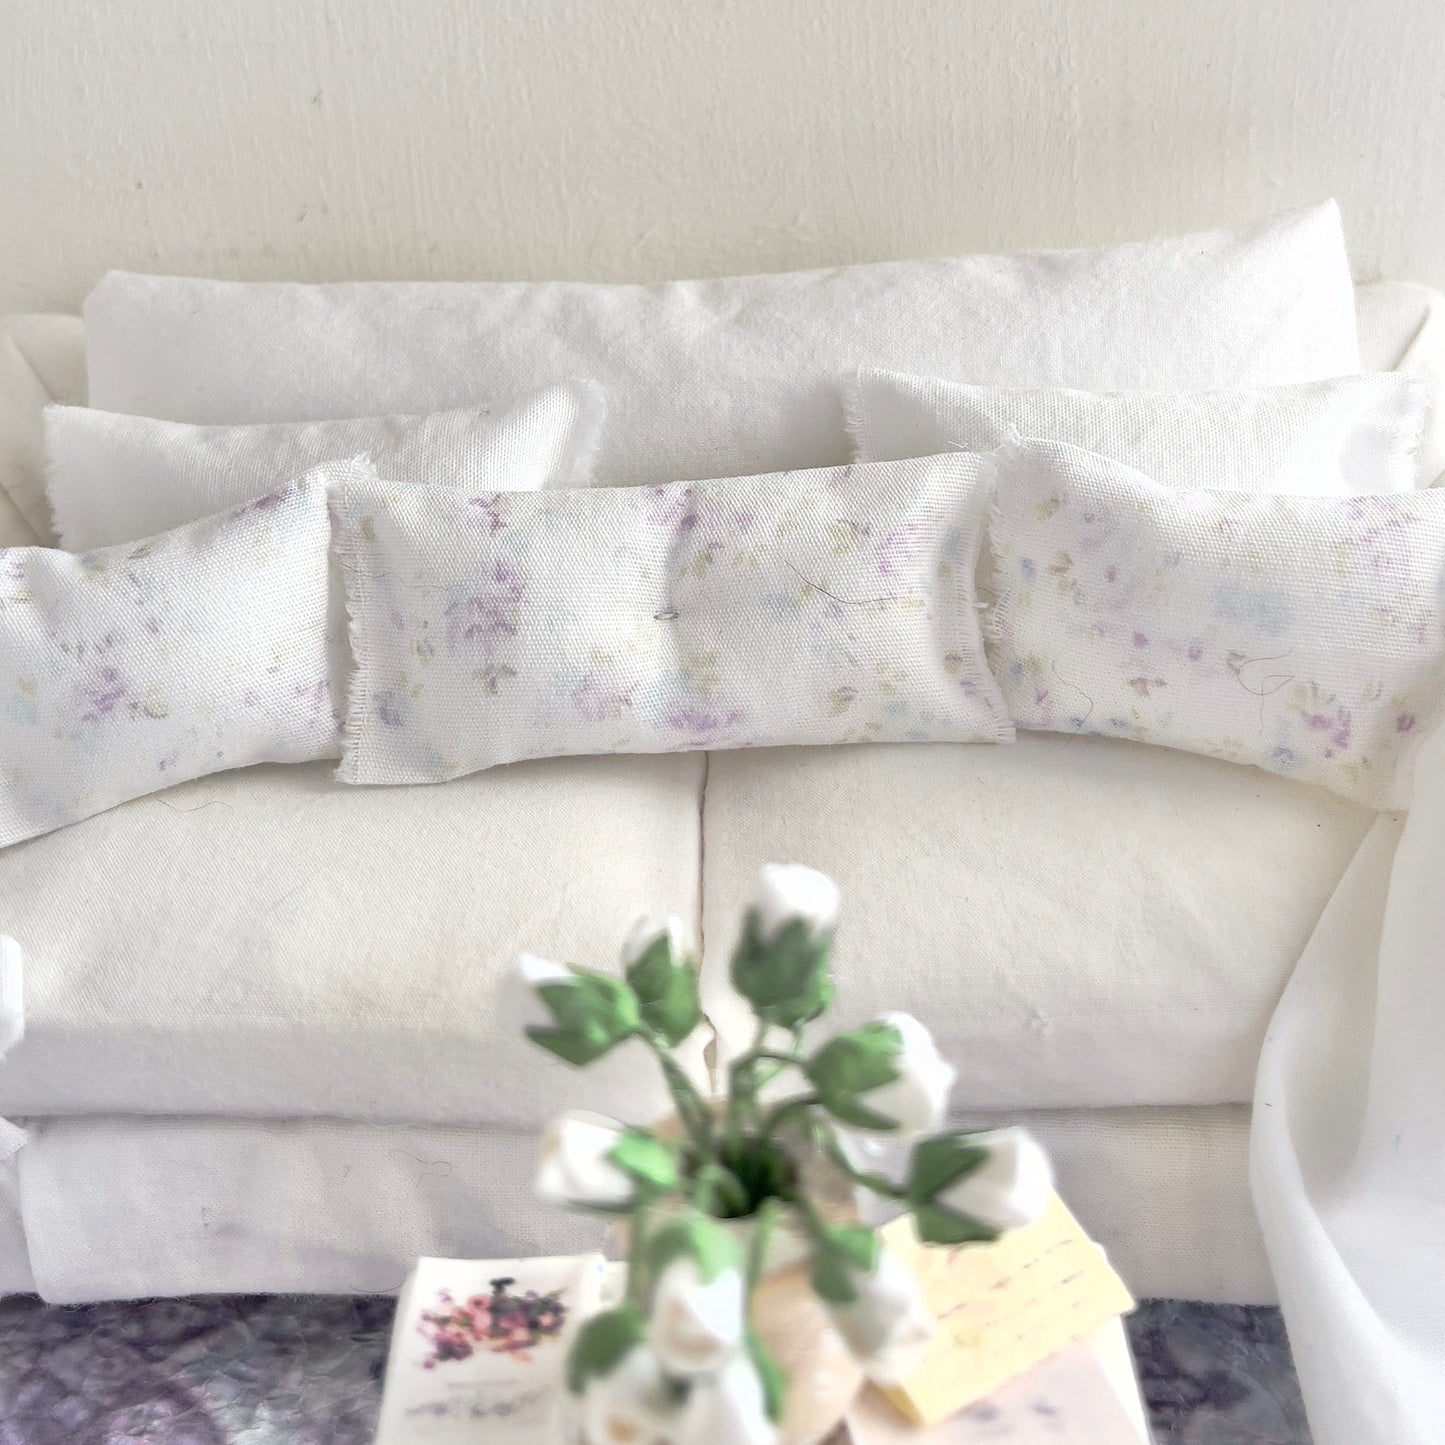 CHANTALLENA Pillow Set | Shabby Petite Lavender Flowers and Throw- 1:12 scale | Shabby 5